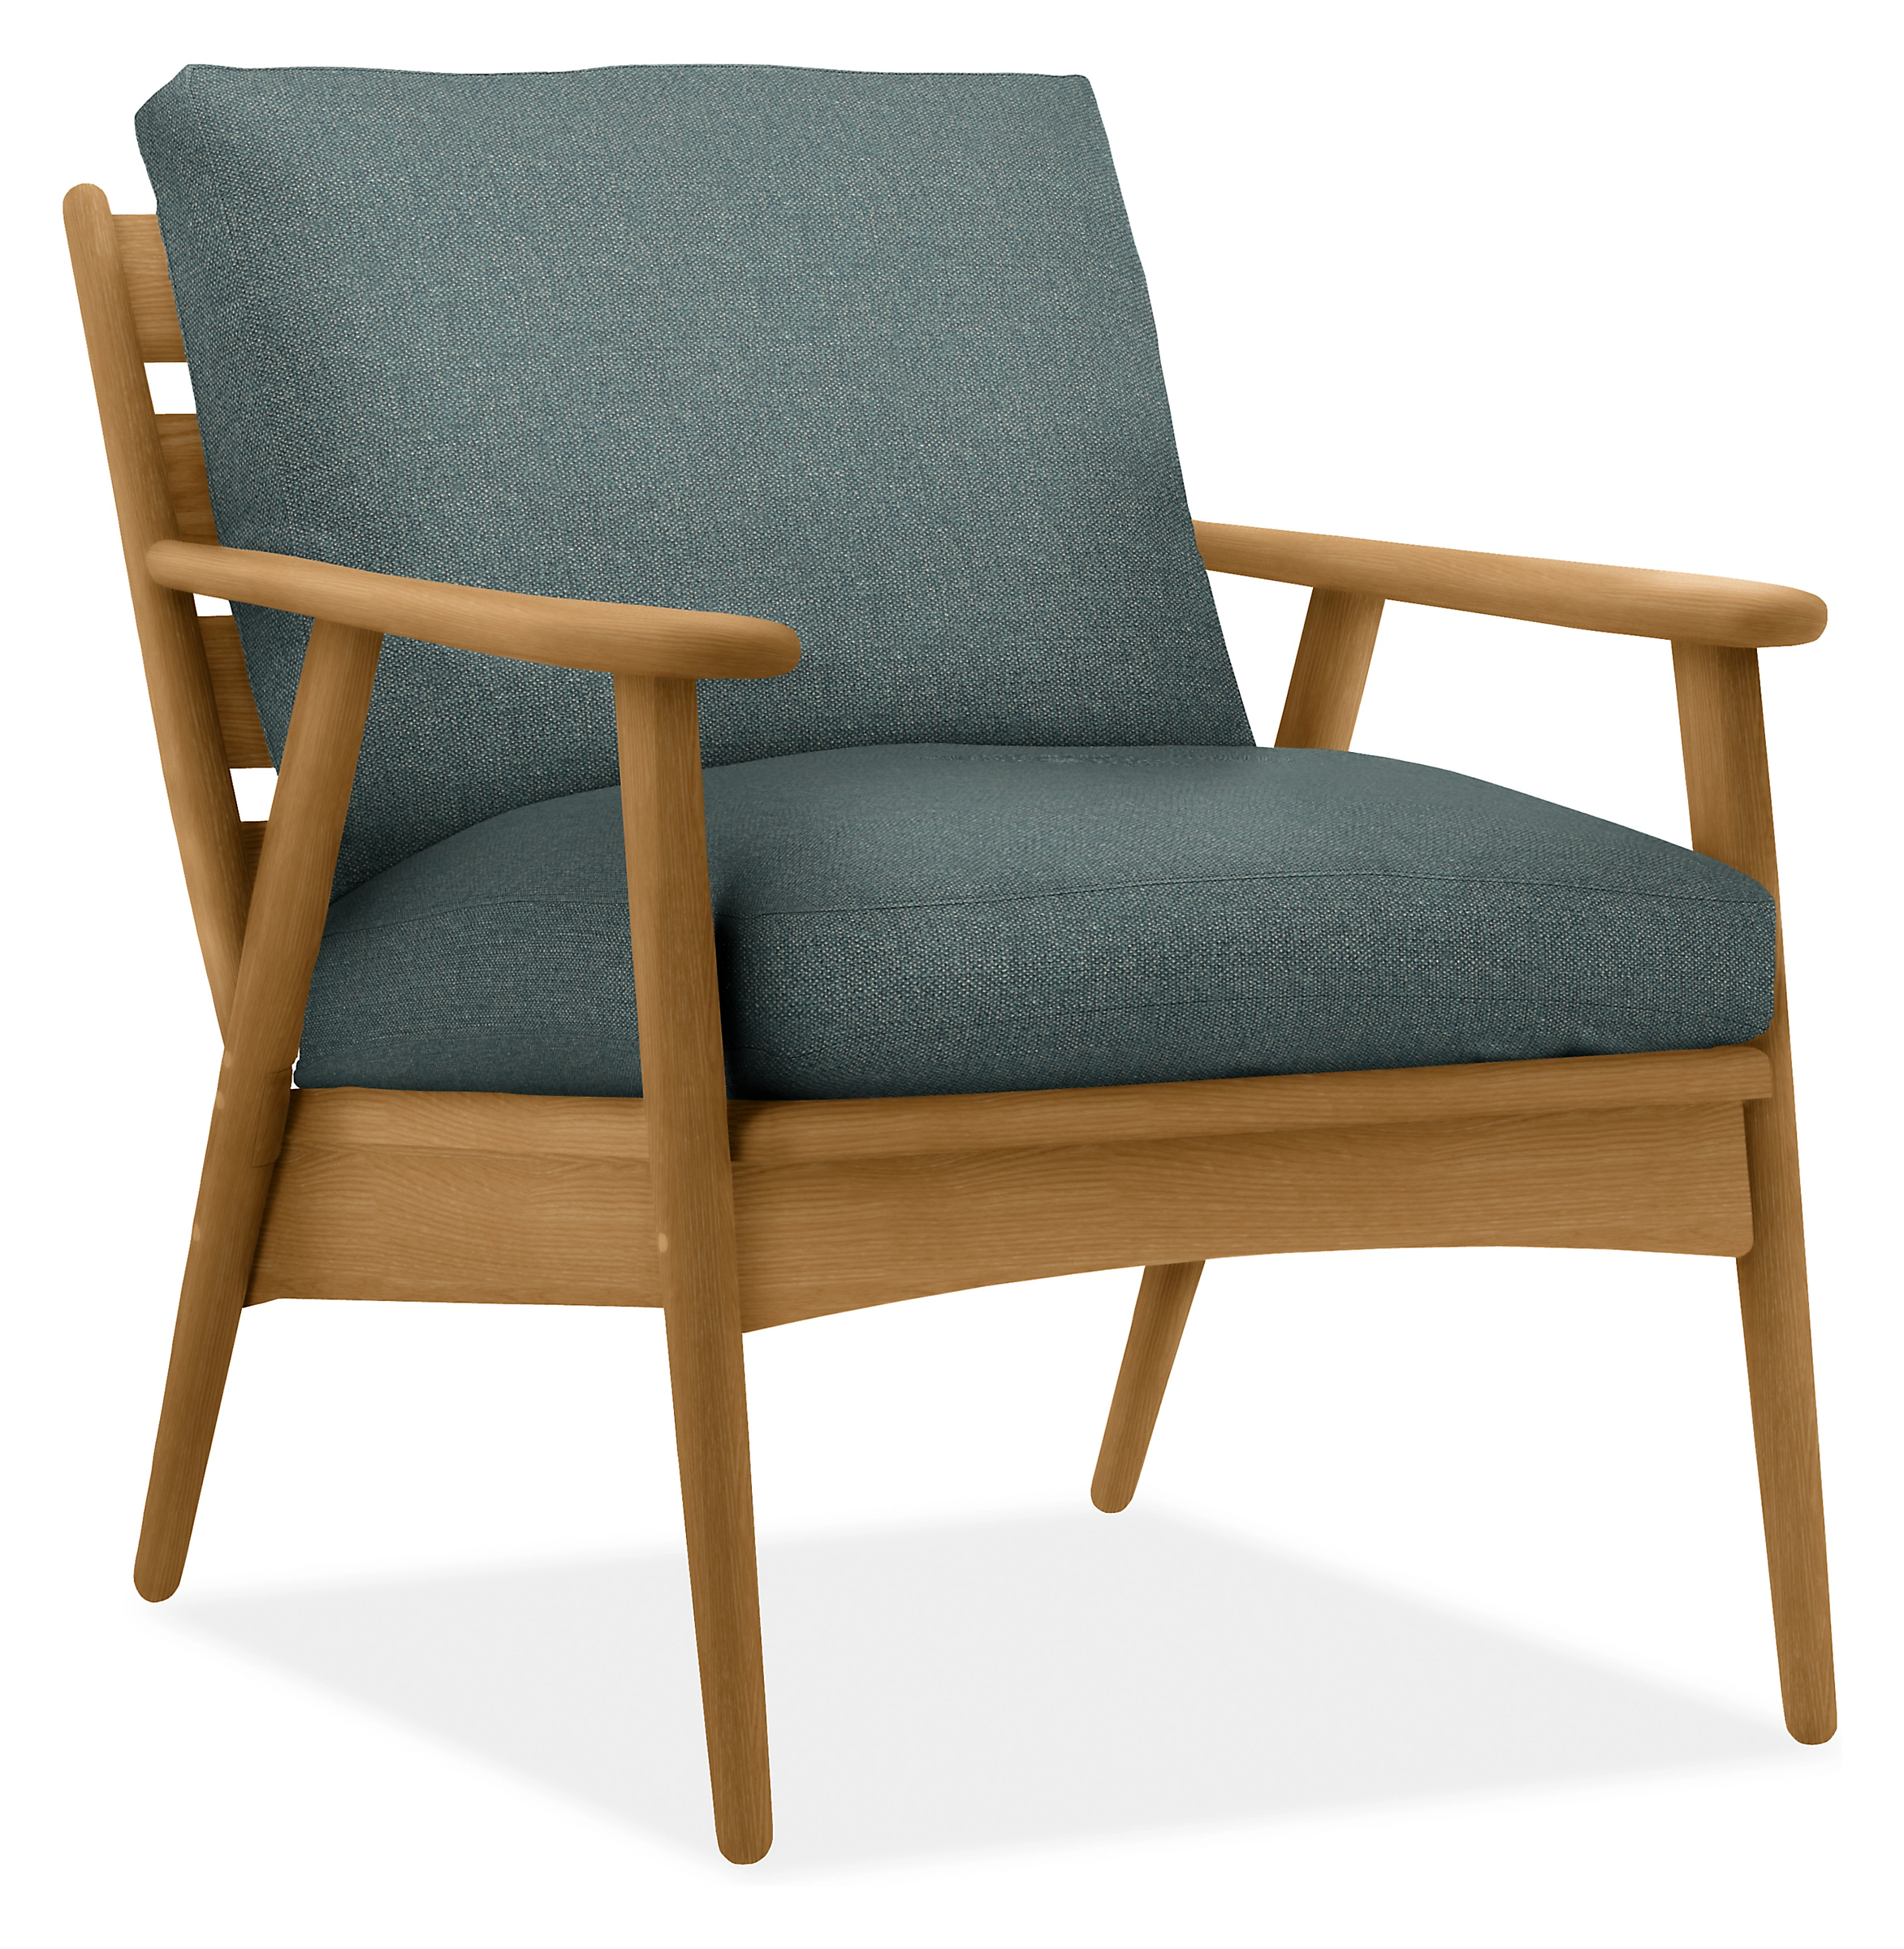 Ericson Lounge Chair in Tepic Haze with White Oak Frame